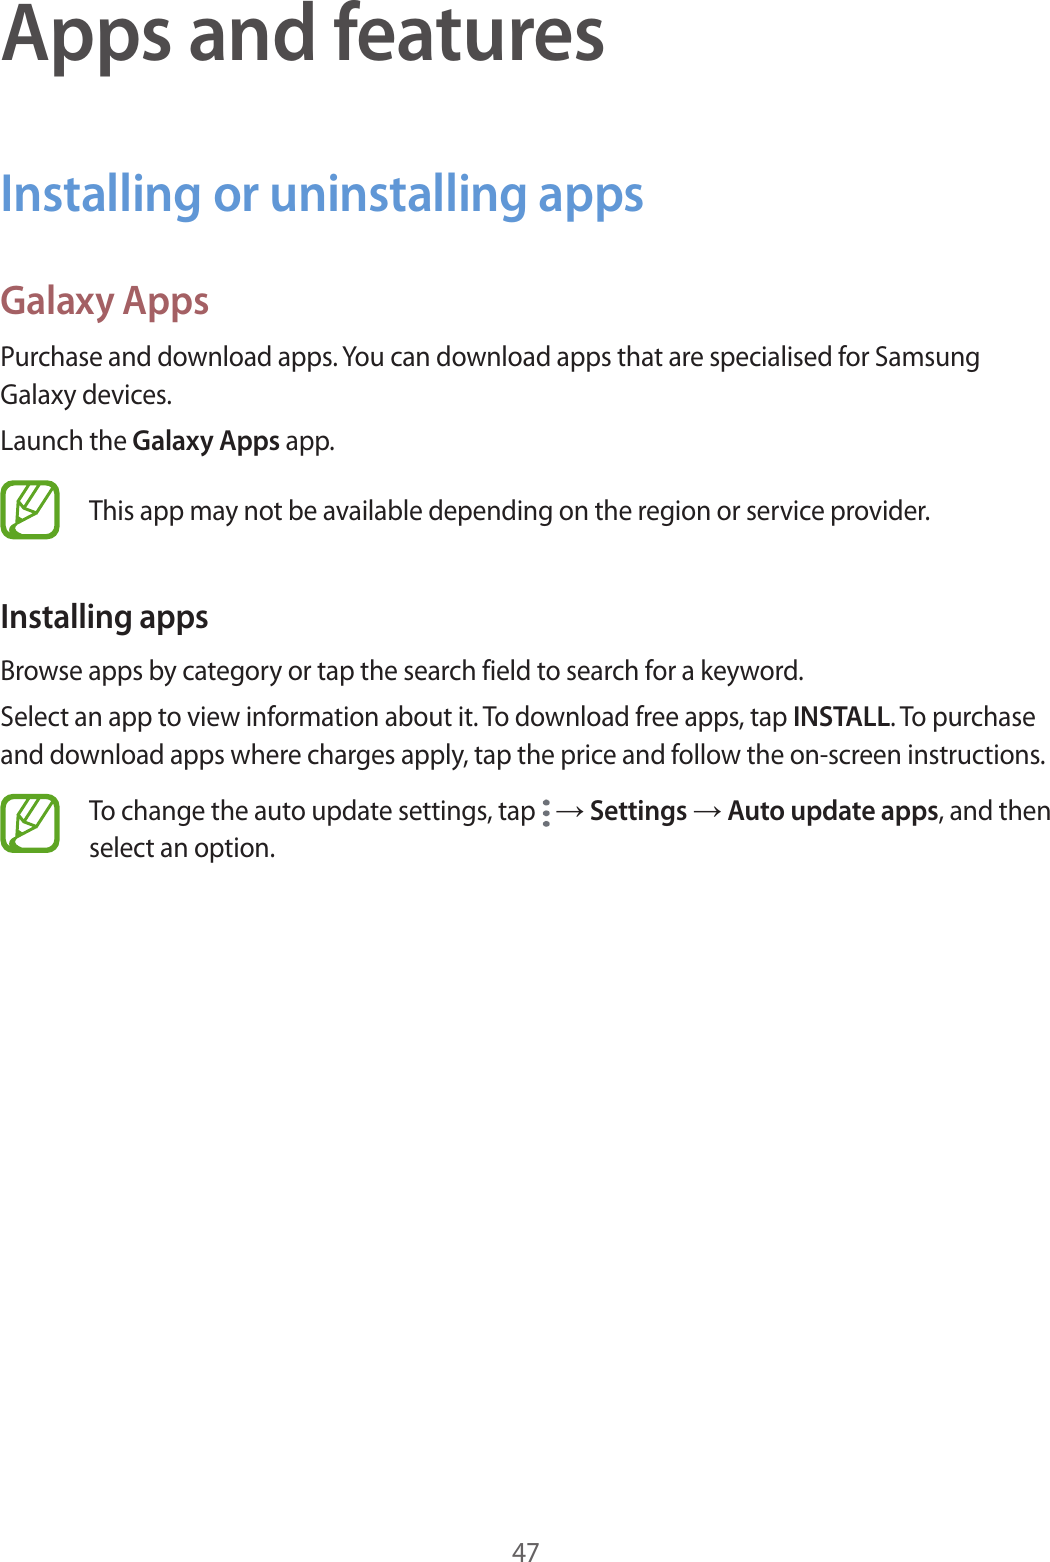 47Apps and featuresInstalling or uninstalling appsGalaxy AppsPurchase and download apps. You can download apps that are specialised for Samsung Galaxy devices.Launch the Galaxy Apps app.This app may not be available depending on the region or service provider.Installing appsBrowse apps by category or tap the search field to search for a keyword.Select an app to view information about it. To download free apps, tap INSTALL. To purchase and download apps where charges apply, tap the price and follow the on-screen instructions.To change the auto update settings, tap   → Settings → Auto update apps, and then select an option.